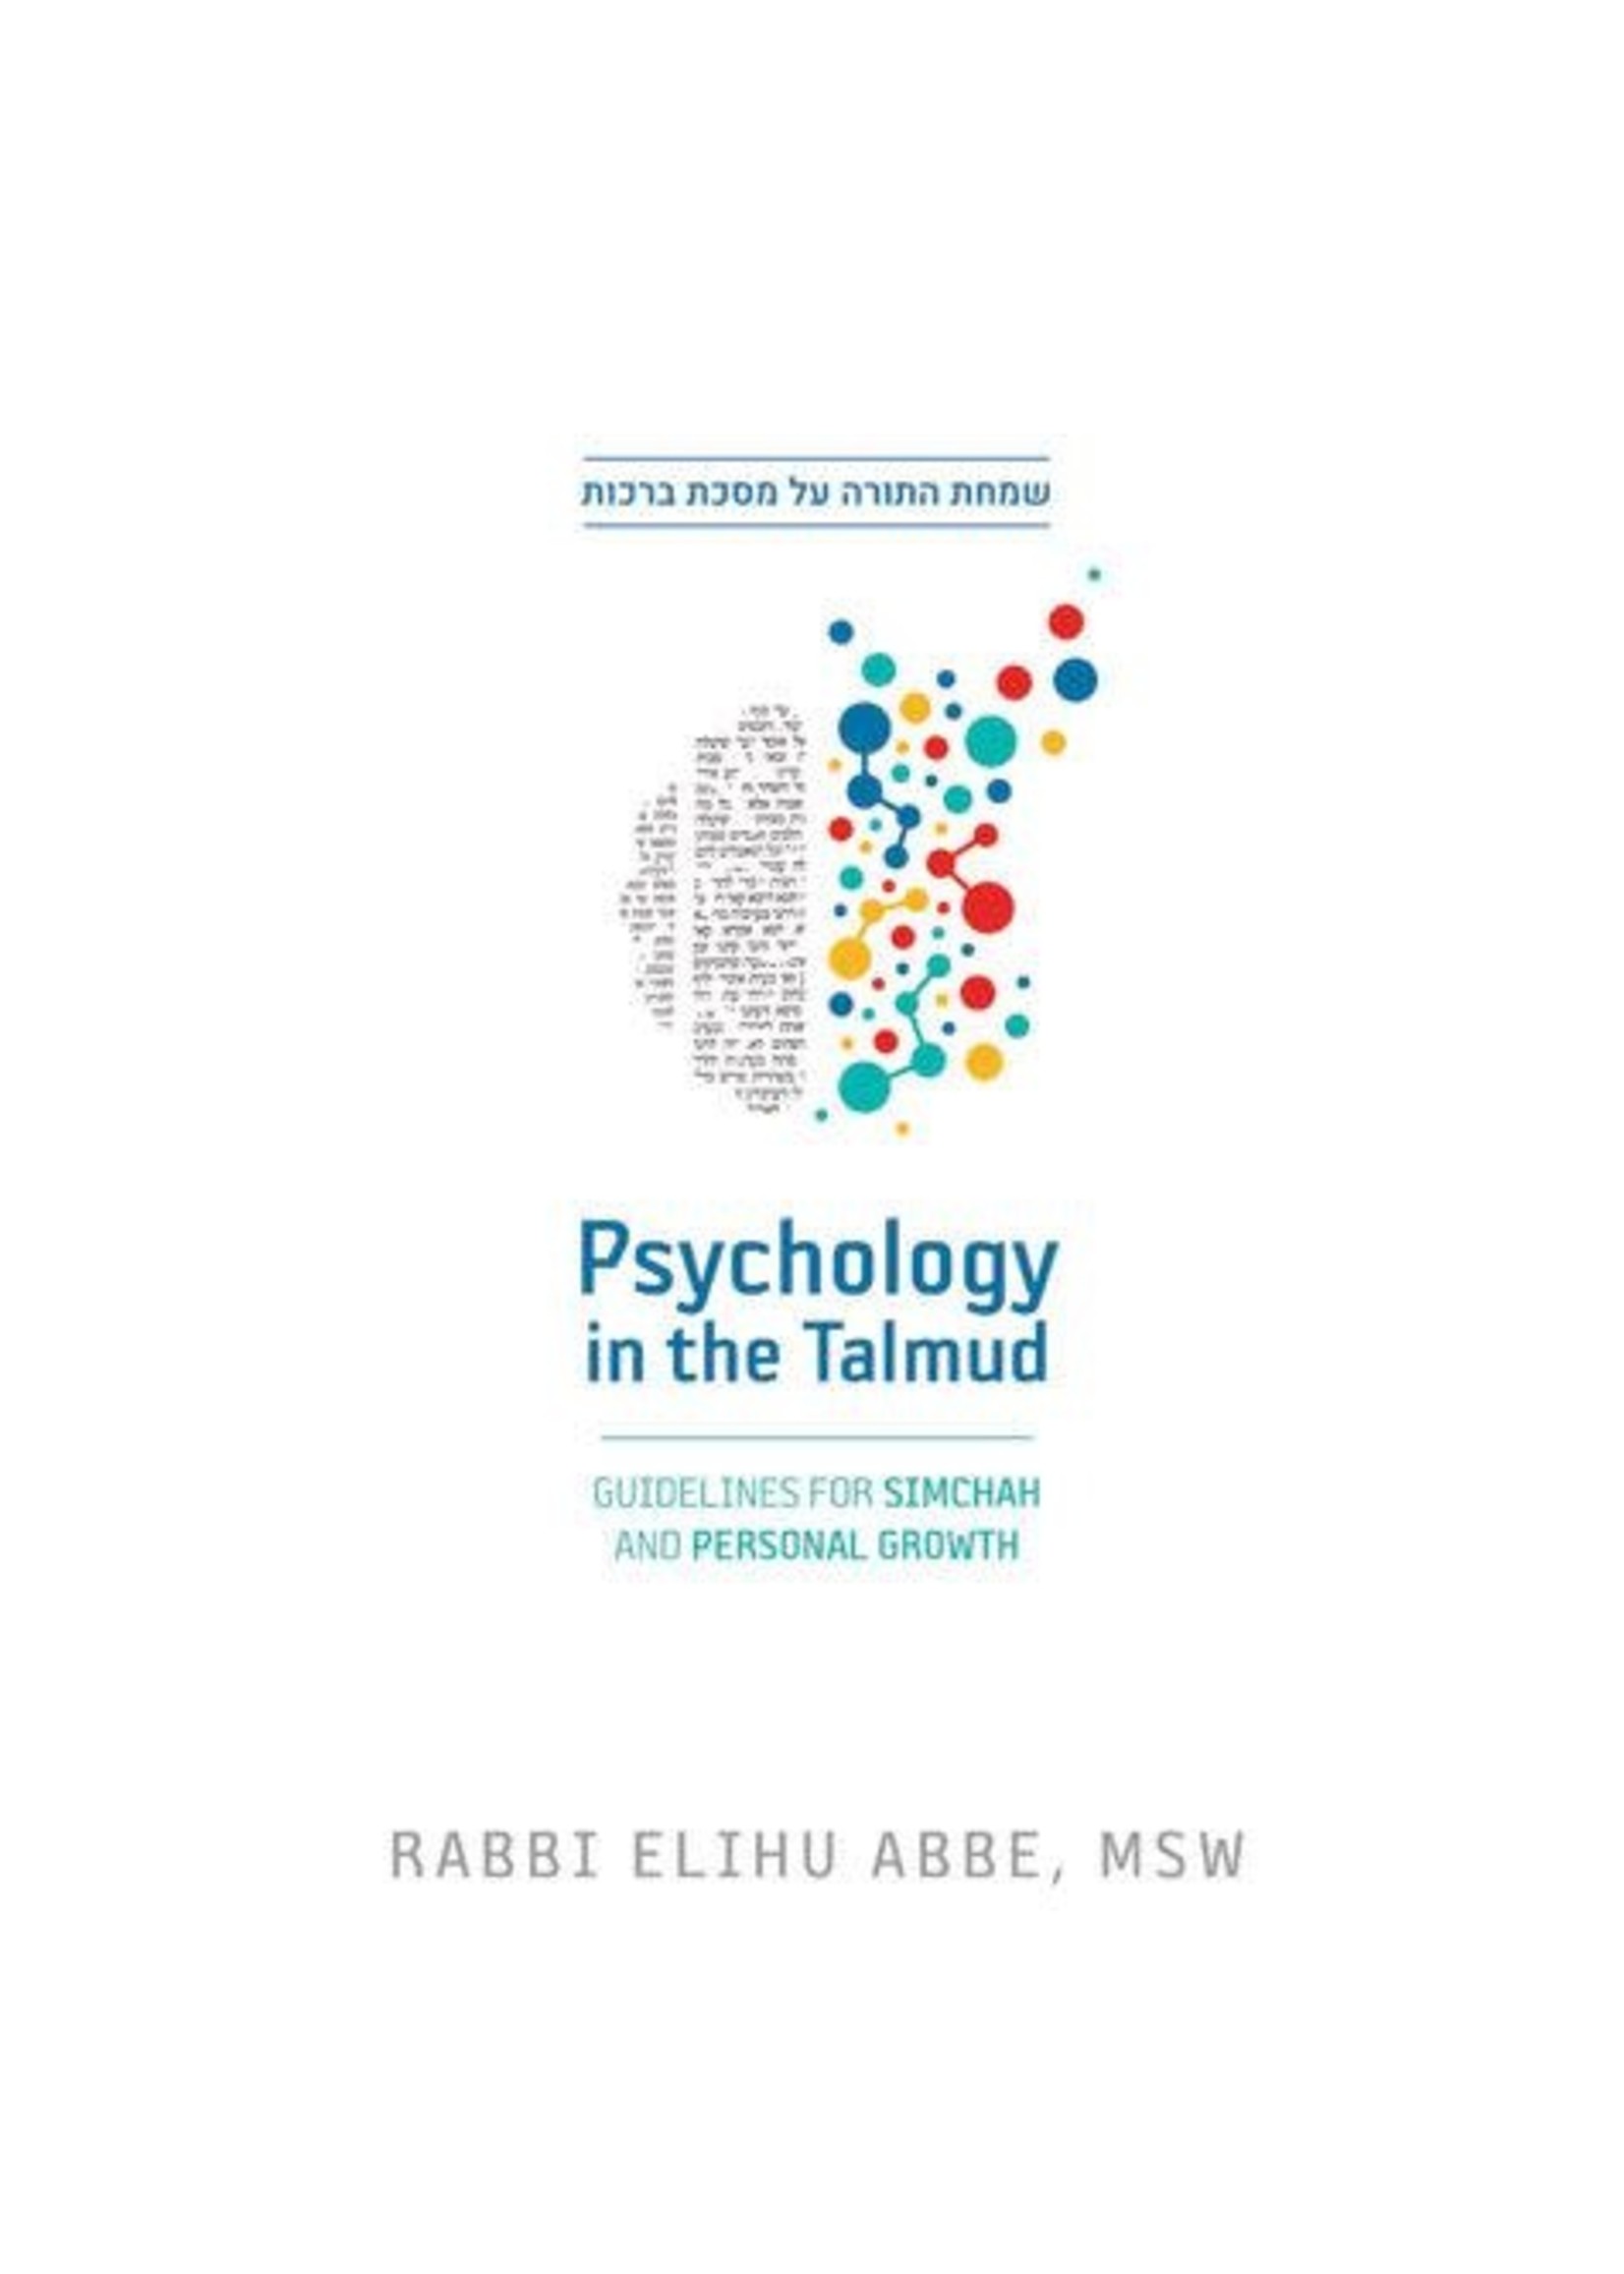 PSYCOLOGY IN THE TALMUD